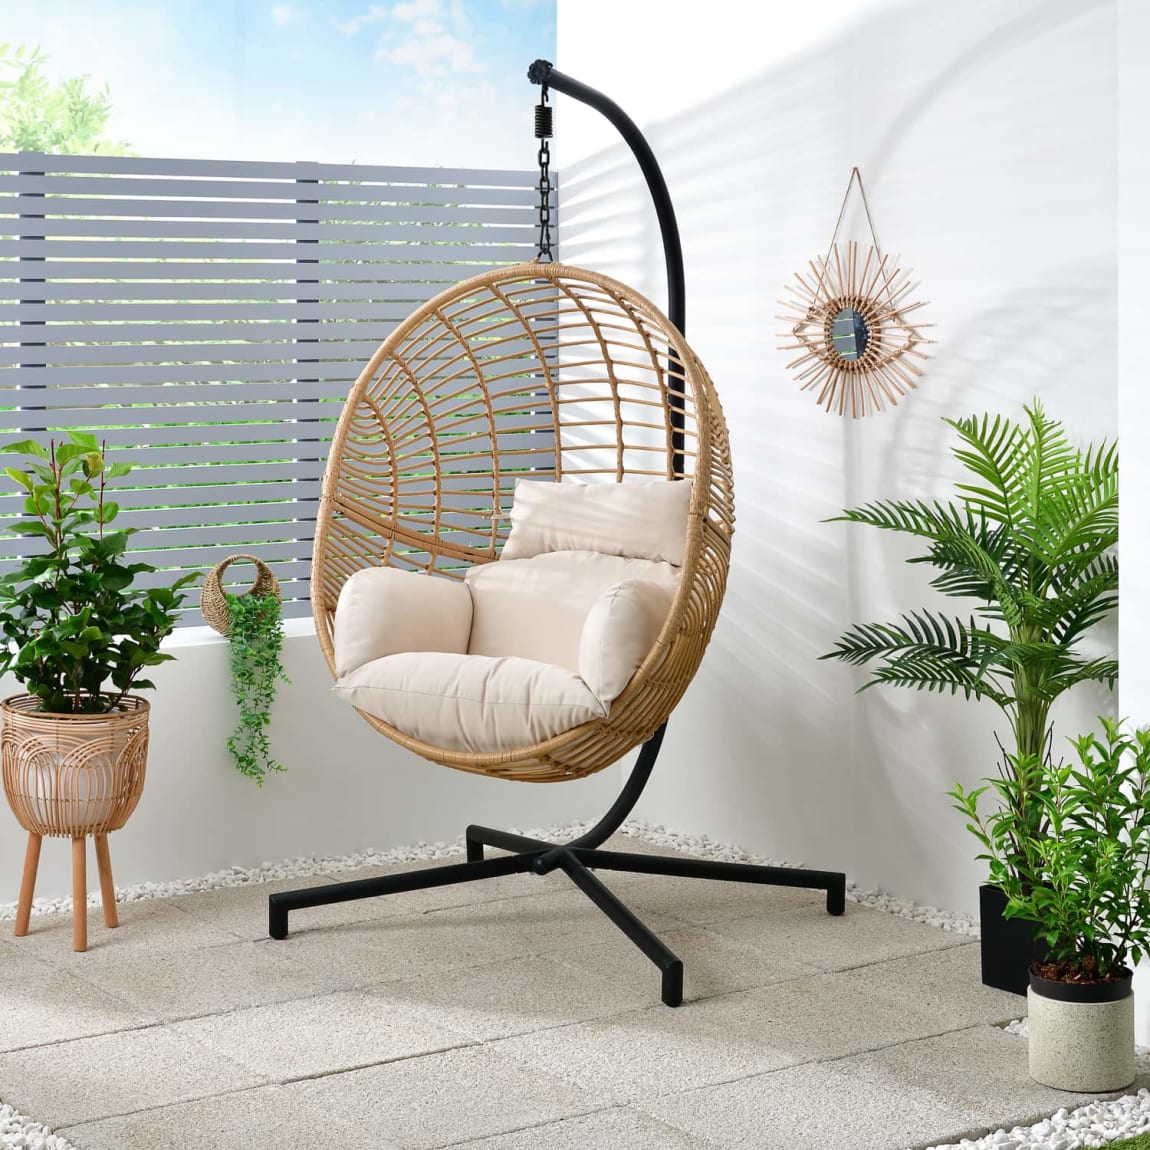 Save £85 on this Island Paradise egg chair at B&M